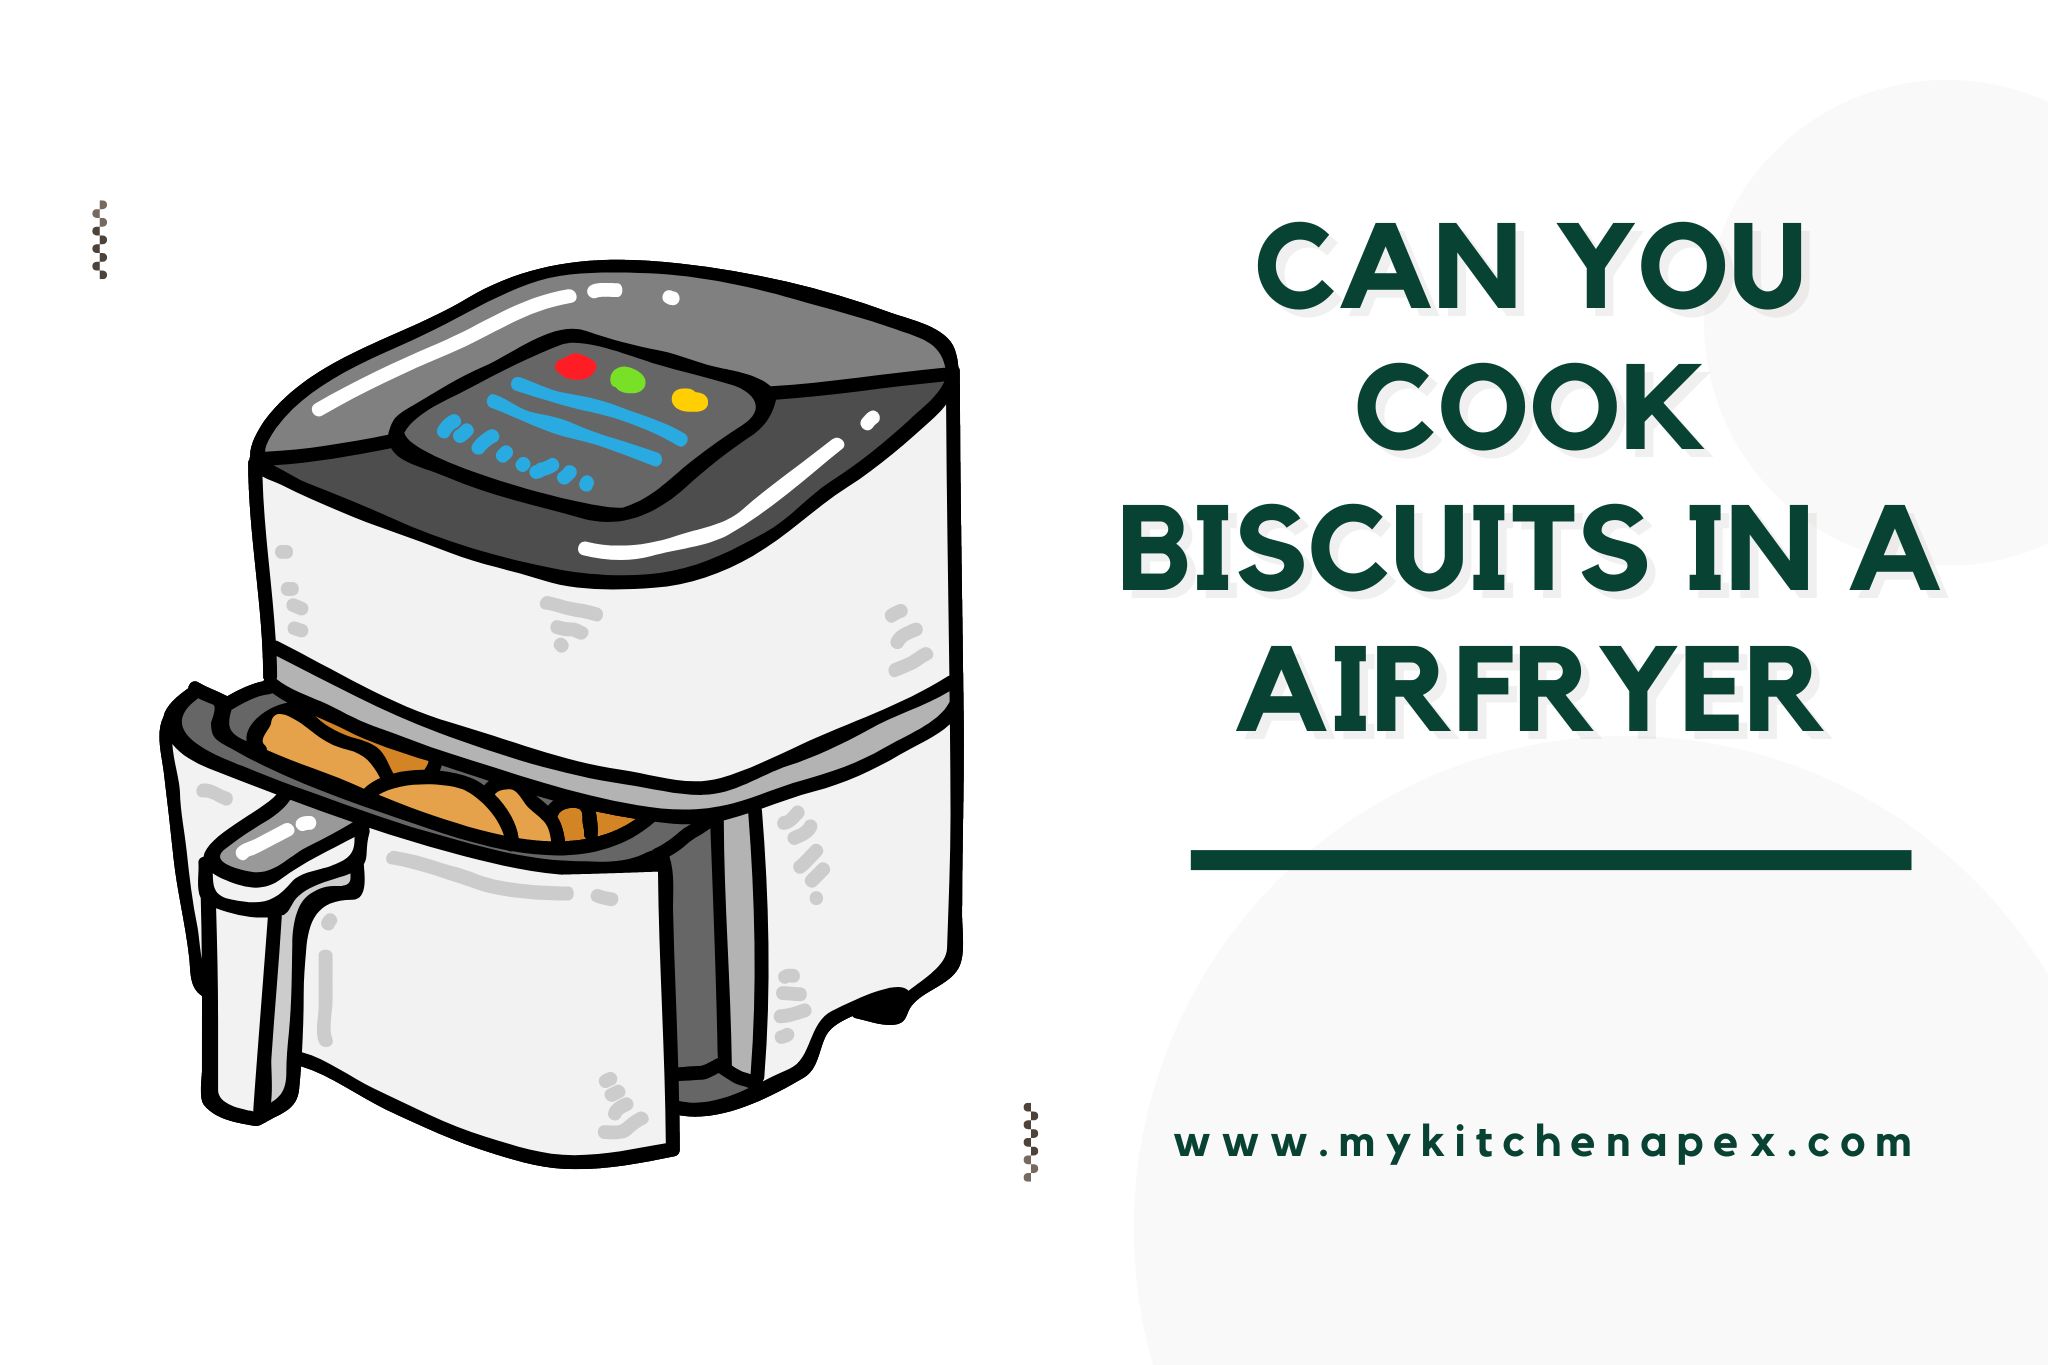 can you cook biscuits in a airfryer